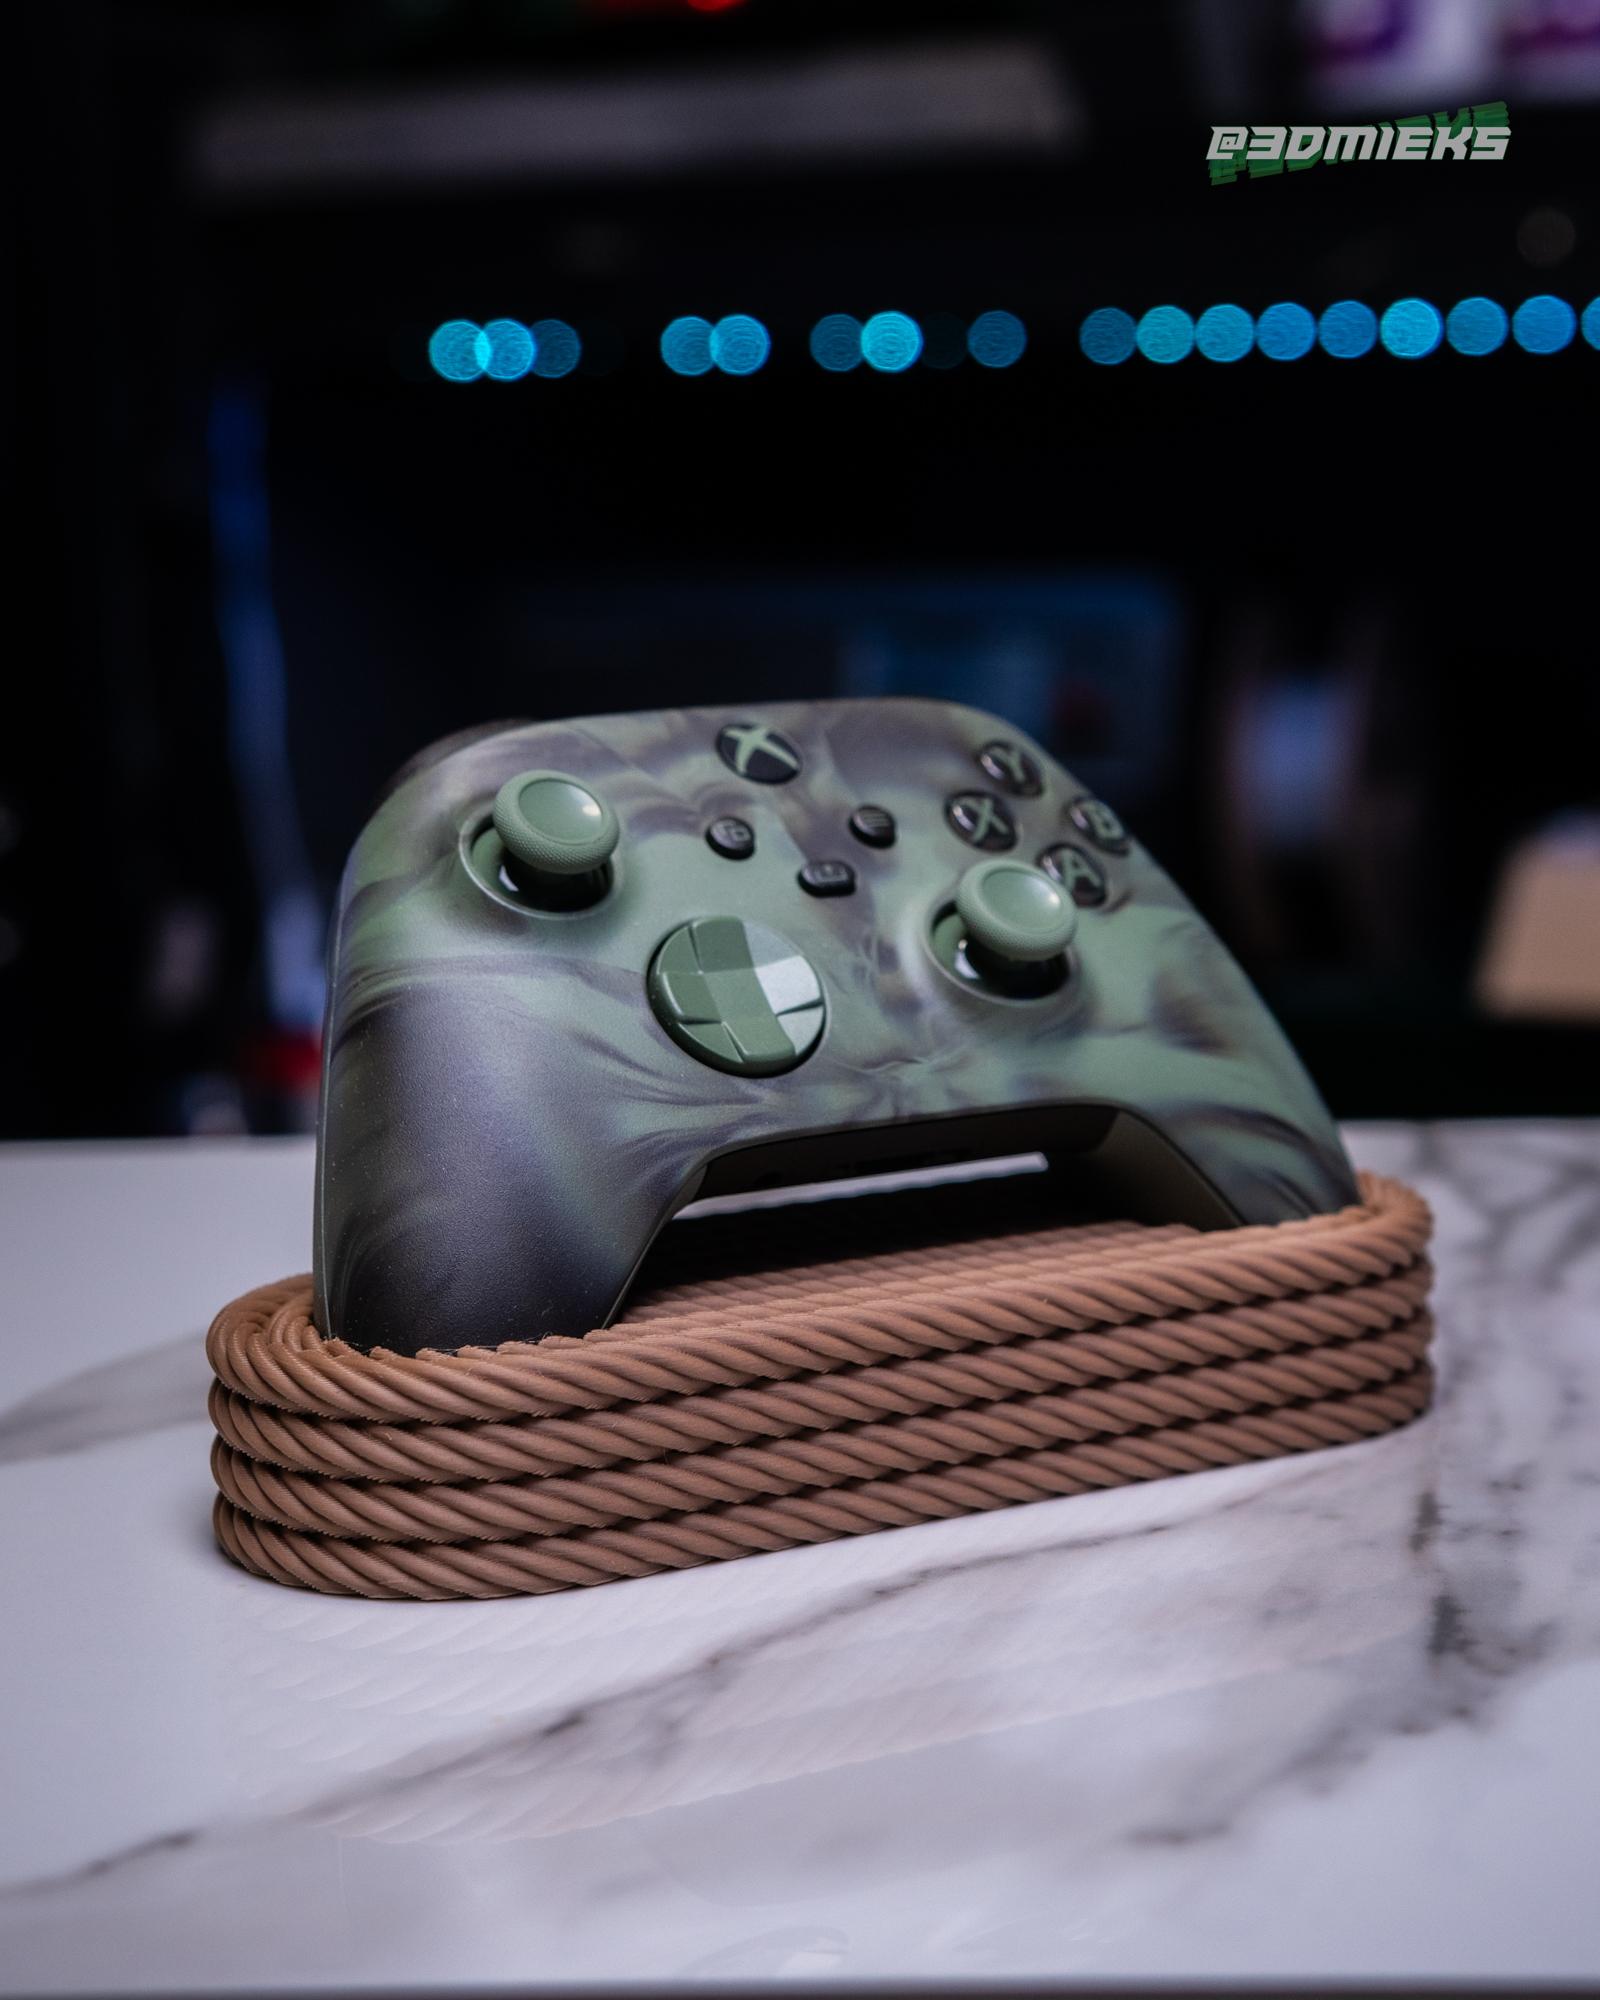 Rope Series | XBOX & PS5 Controller Stand 3d model